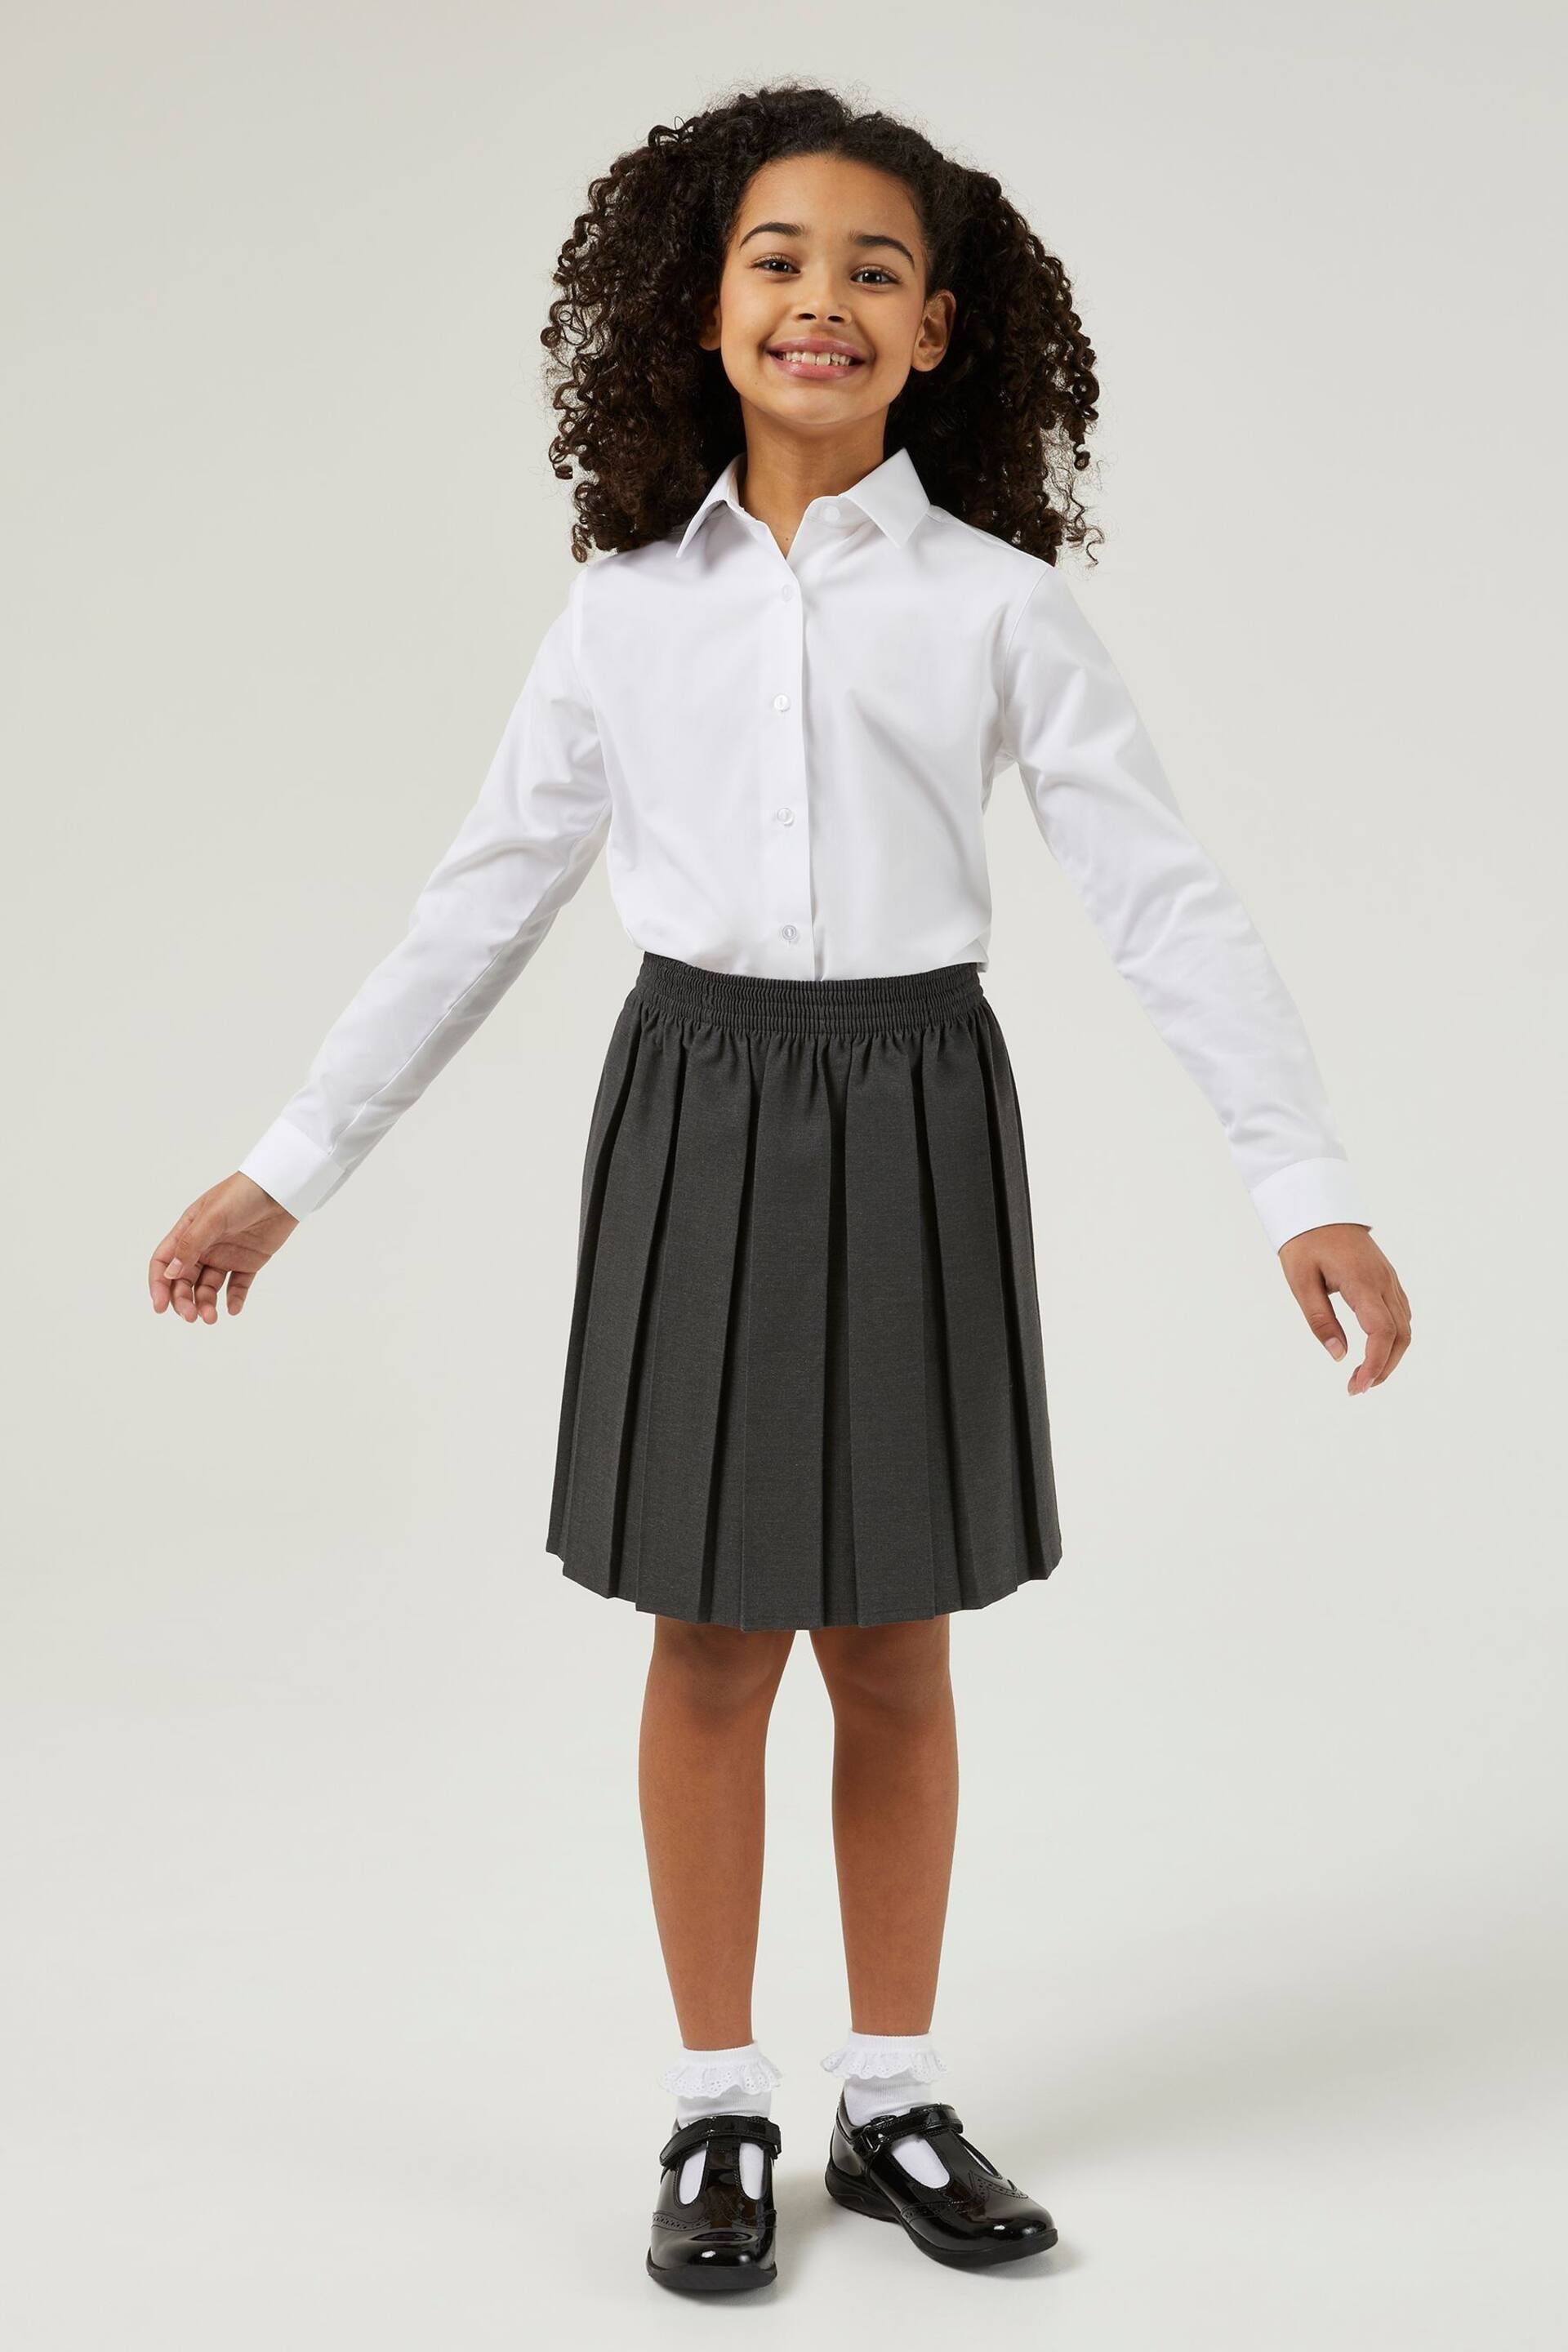 Trutex White Regular Fit Long Sleeve 3 Pack School Shirts - Image 3 of 7